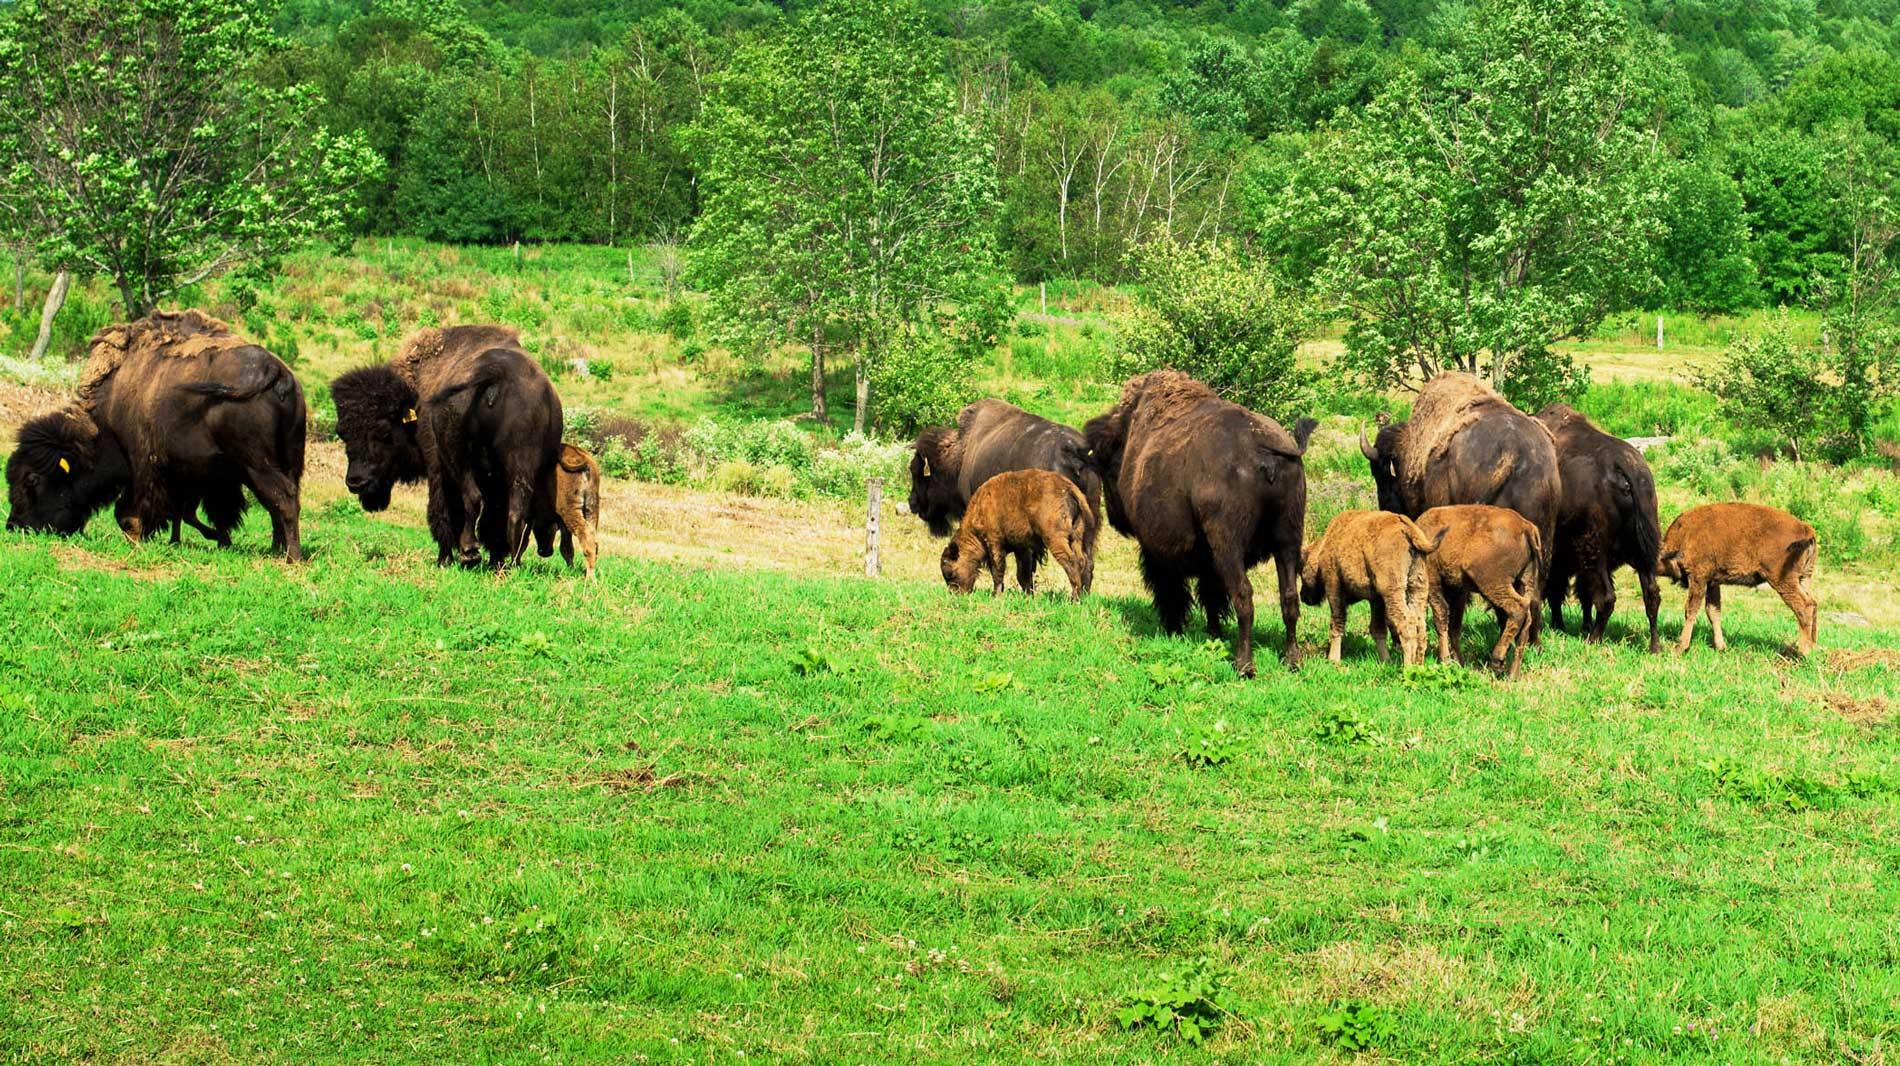 Bison vs. Buffalo: What's the Difference? - Buck Wild Bison